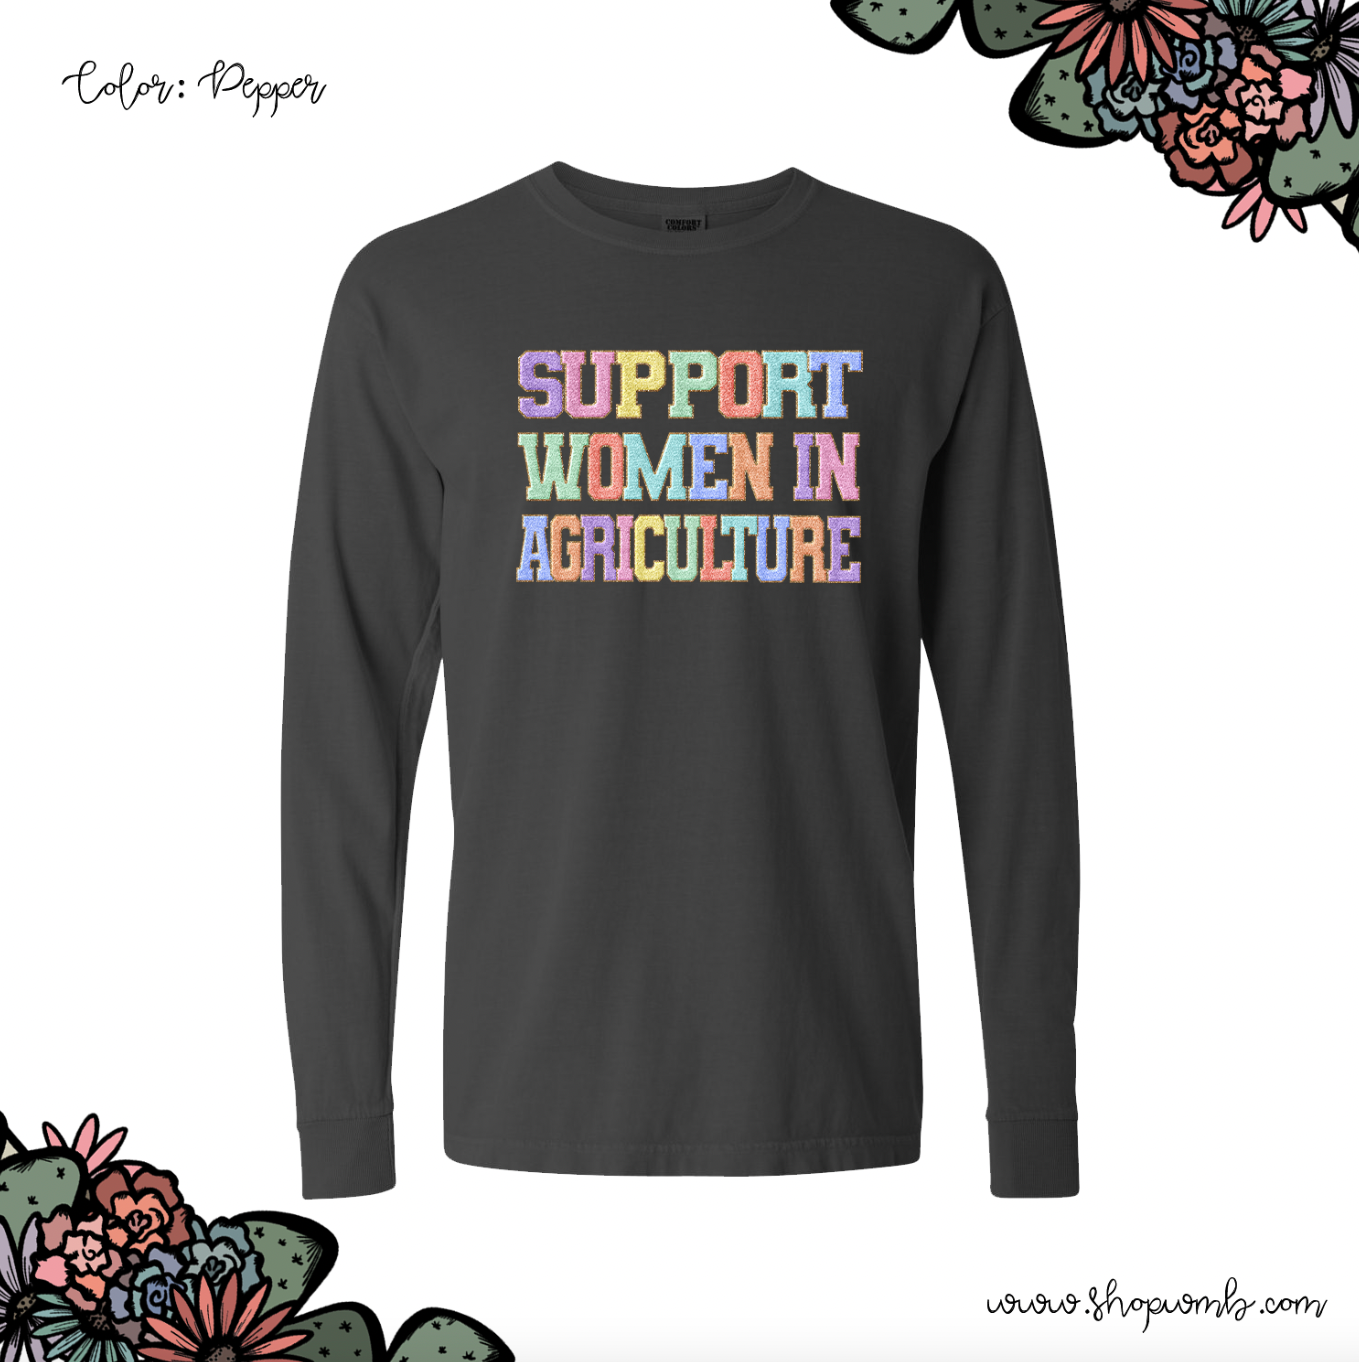 Faux Chenille Support Women In Agriculture LONG SLEEVE T-Shirt (S-3XL) - Multiple Colors!